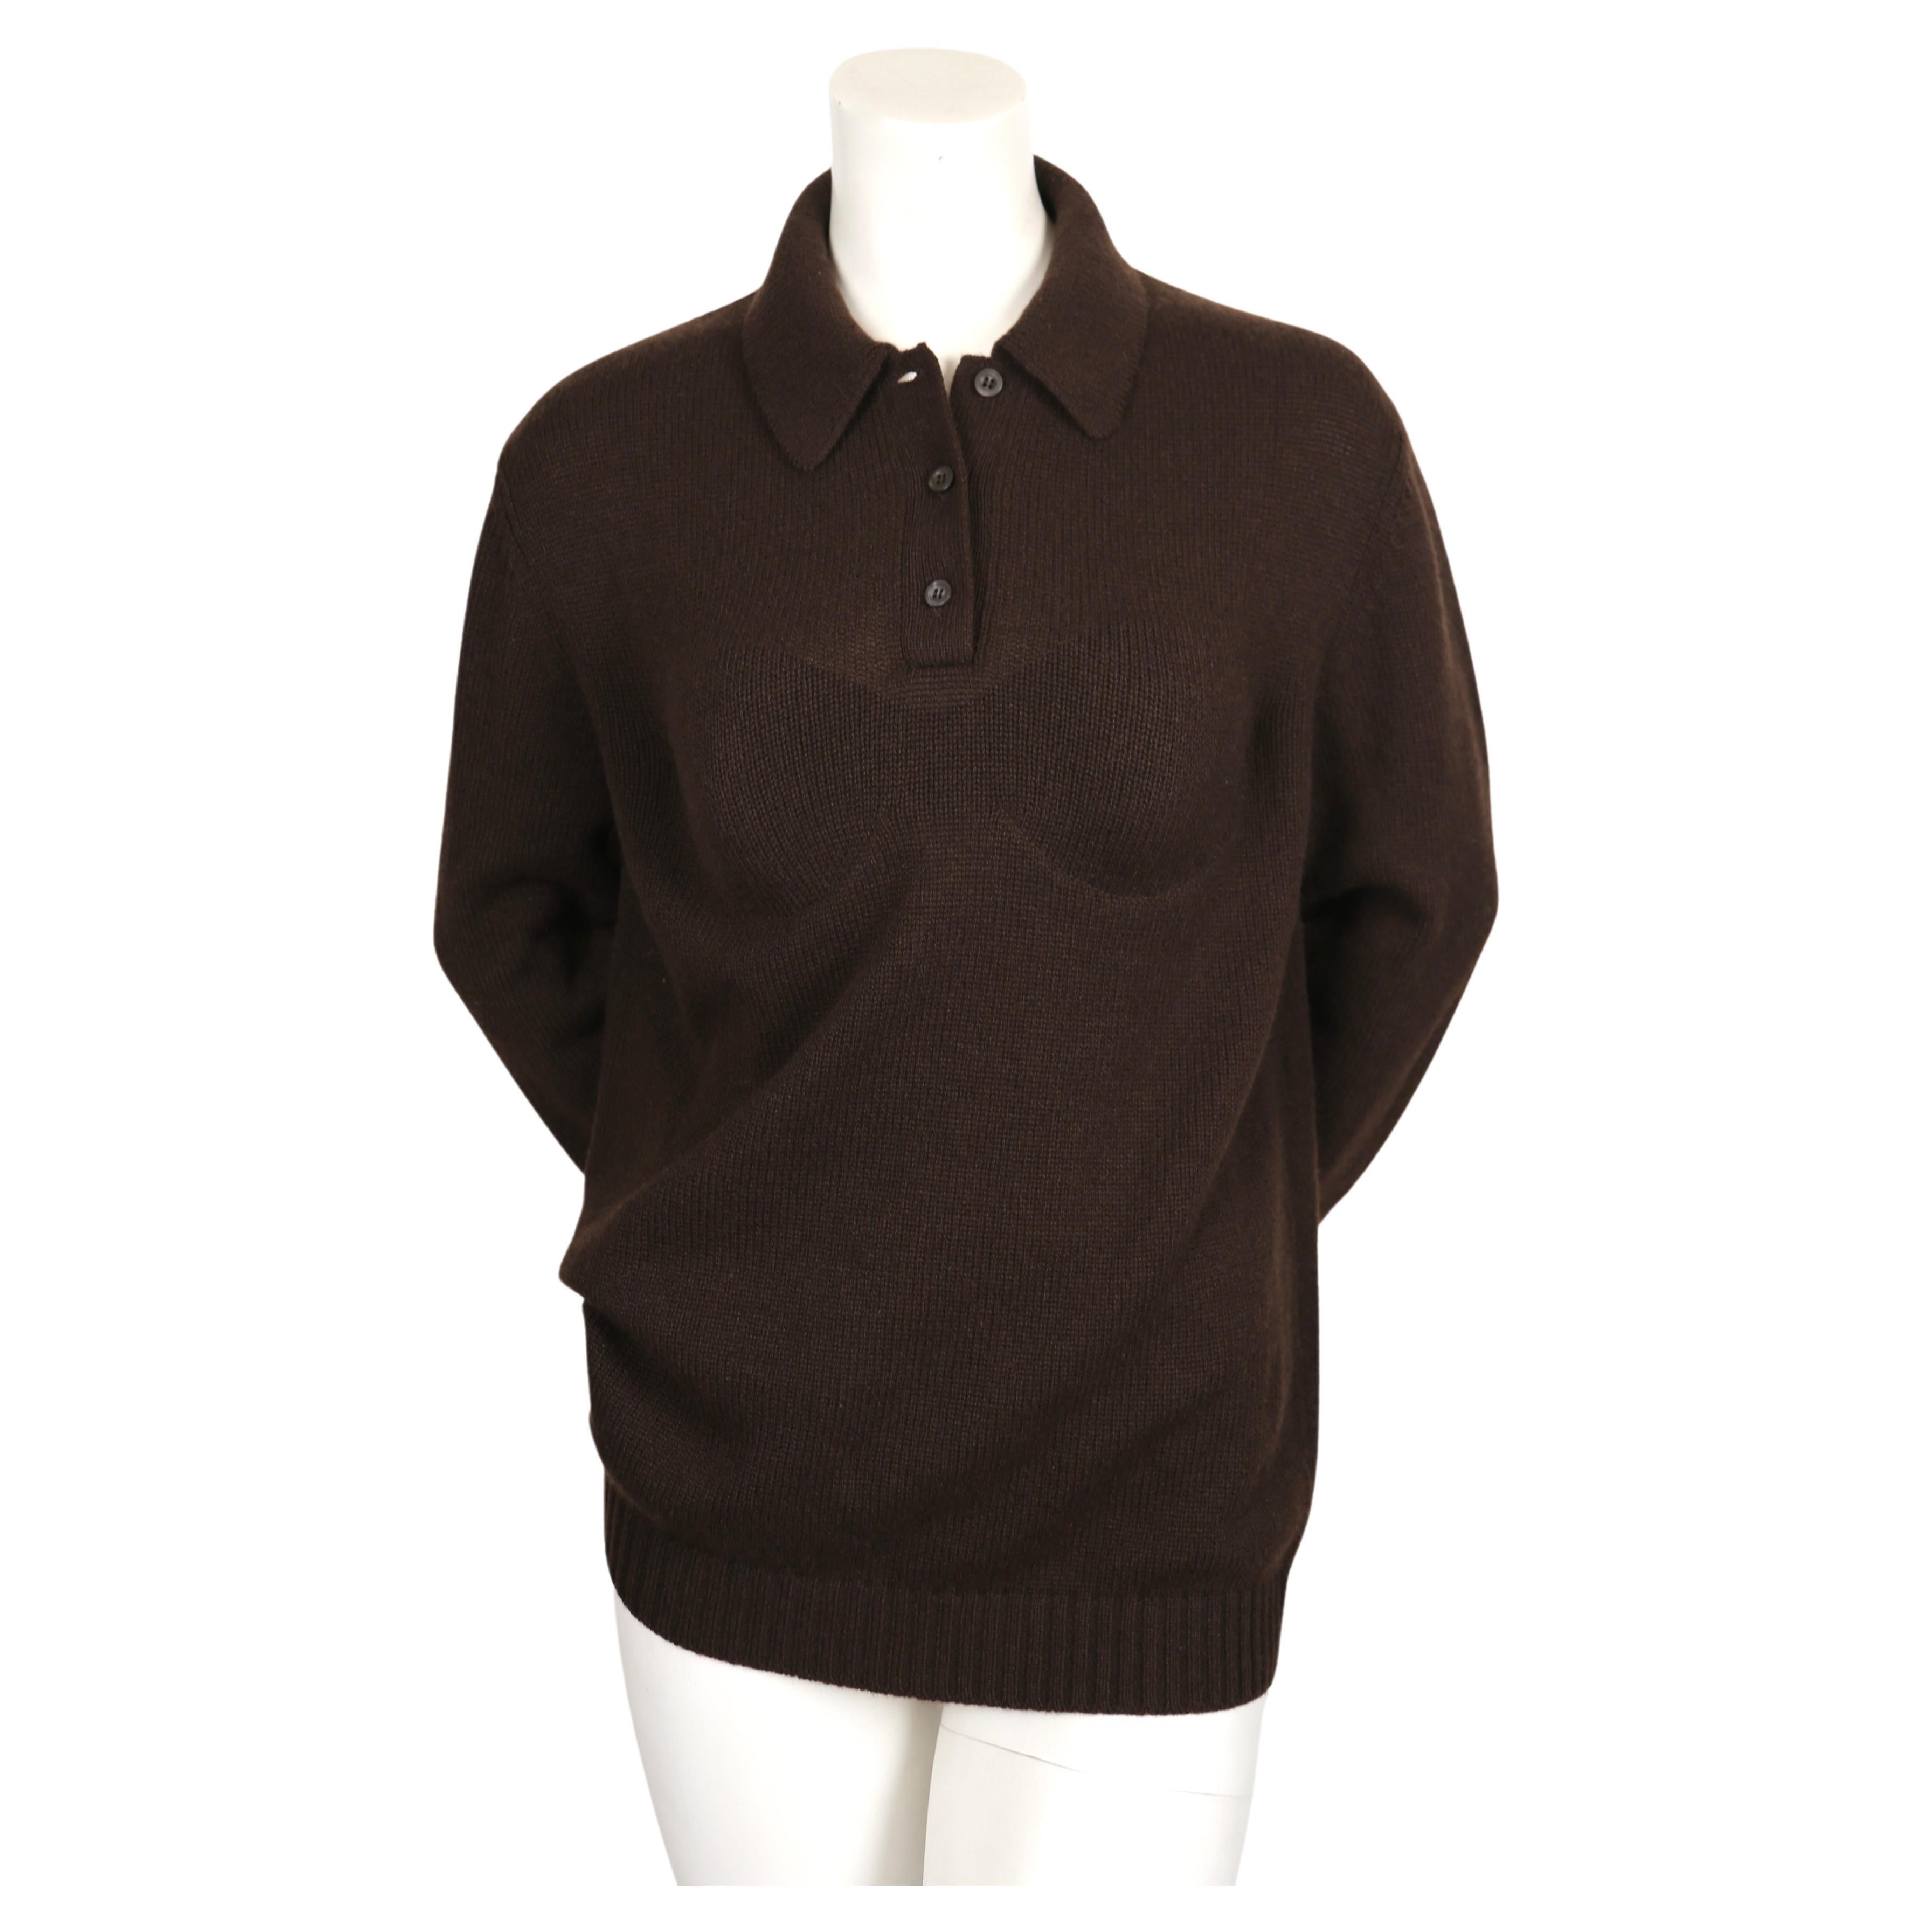 Deep brown cashmere polo sweater with integrated bra designed by Miuccia Prada and Raf Simons exactly as seen on the spring 2022 runway. Labeled a size 'M' although it can easily fit a XS (size of mannequin) or S. Approximate measurements of